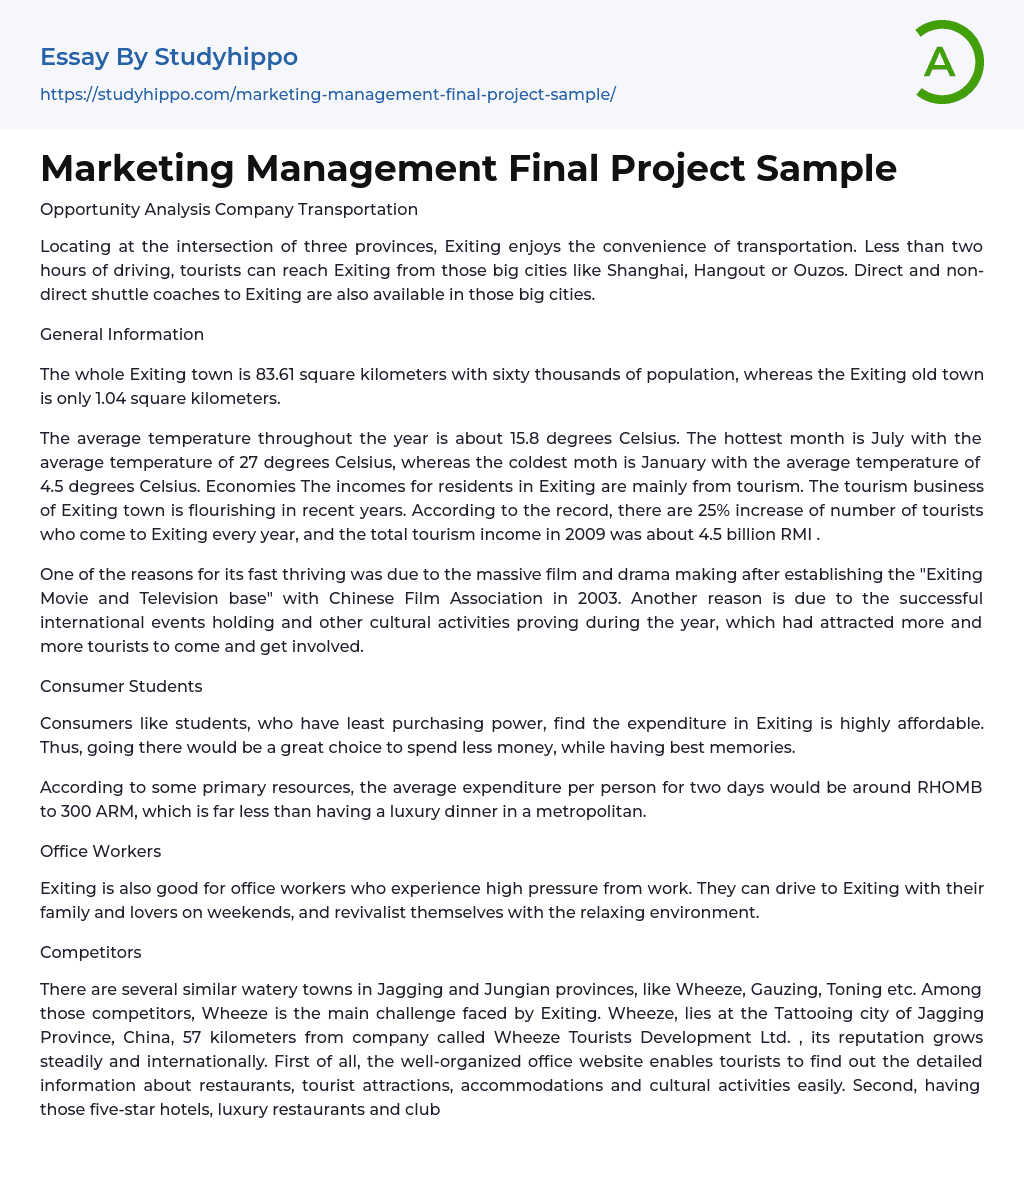 Marketing Management Final Project Sample Essay Example